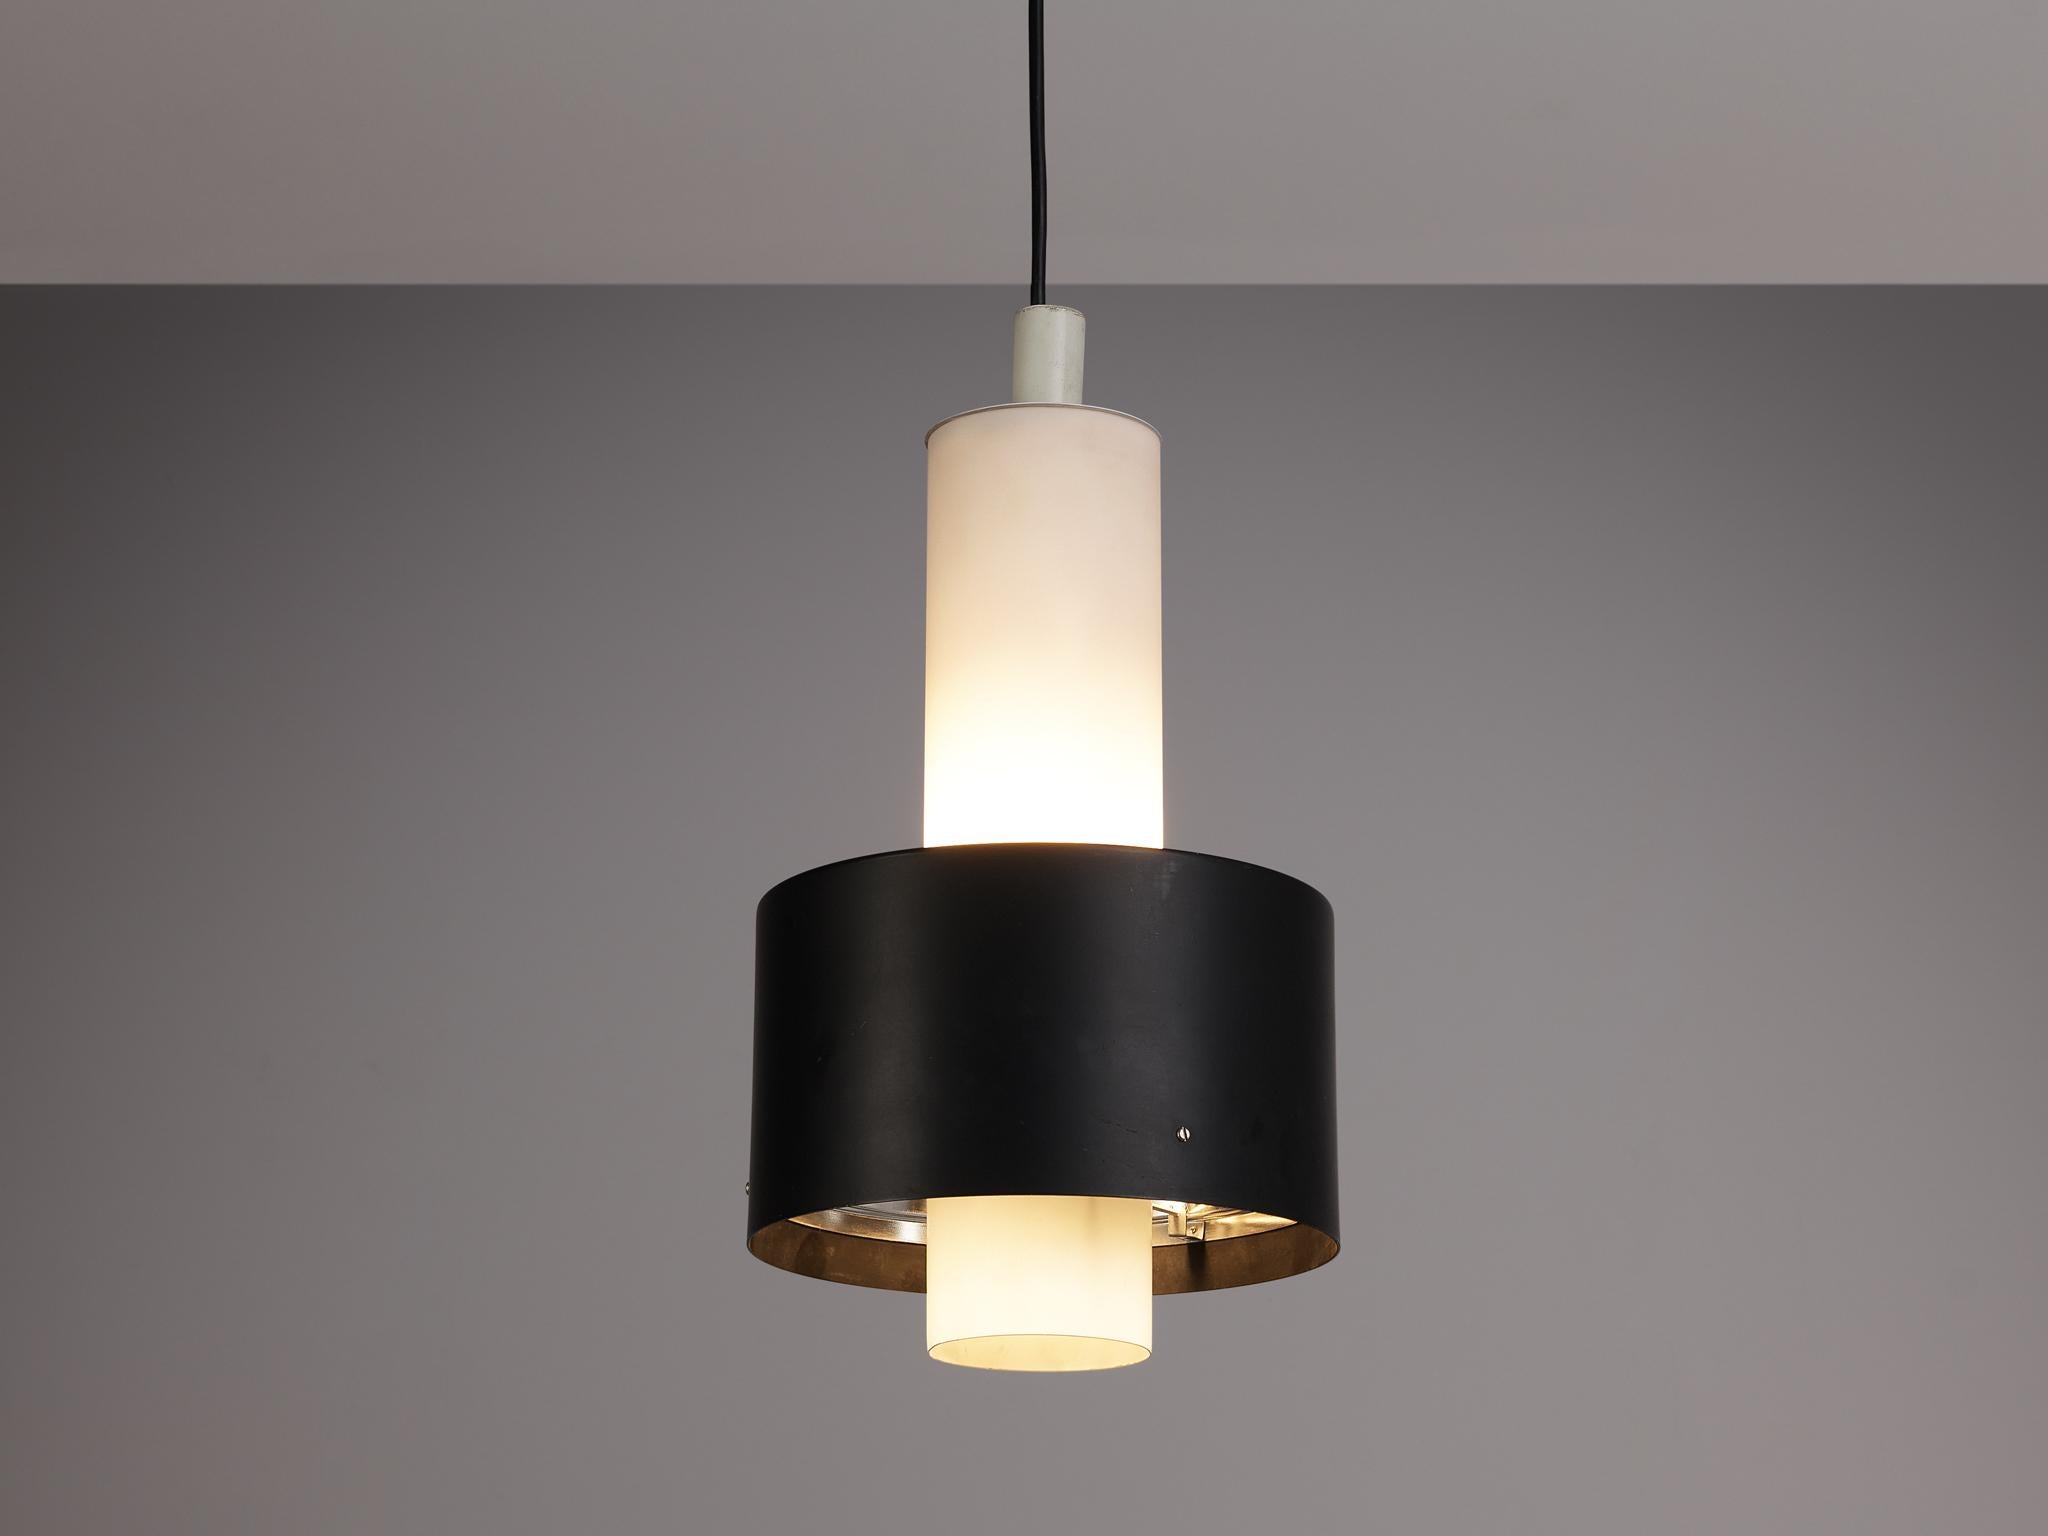 Pendant, metal, Europe, 1970s. 

A circular pendant with consisting of two parts in black and white lacquered metal. A fresh design in neutral colors. The shade is quite large, making it a remarkable light source in a space or room.

Please note